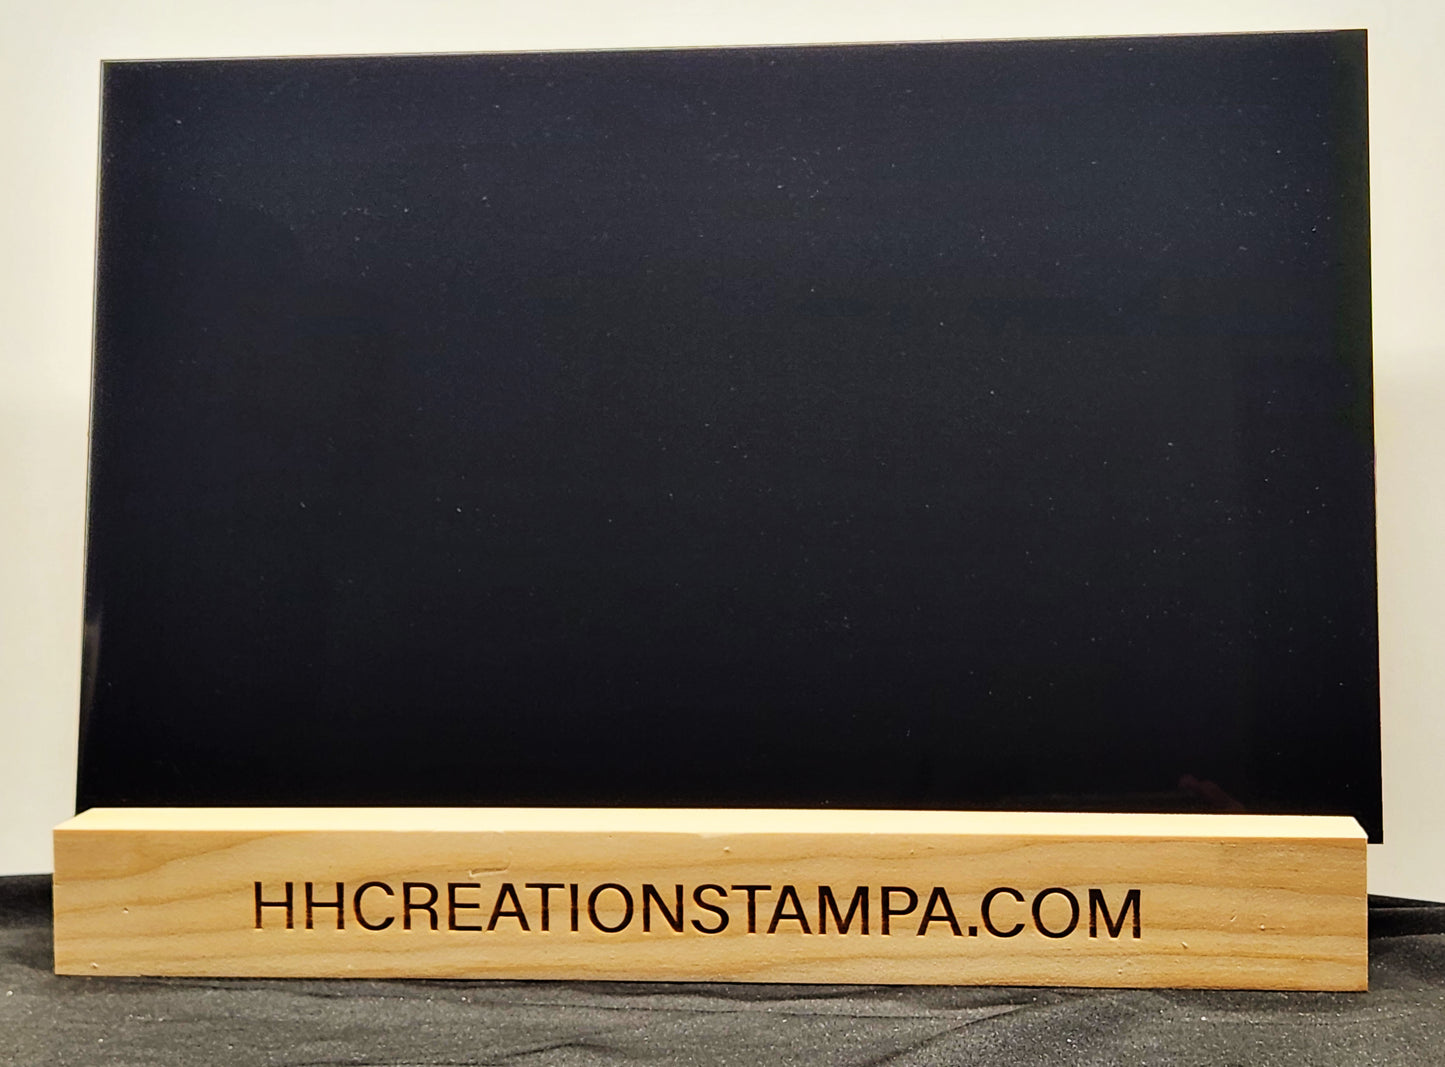 1/8" Black Cast Acrylic Sheets - Glossy on Both Sides - 11.75" x 19"